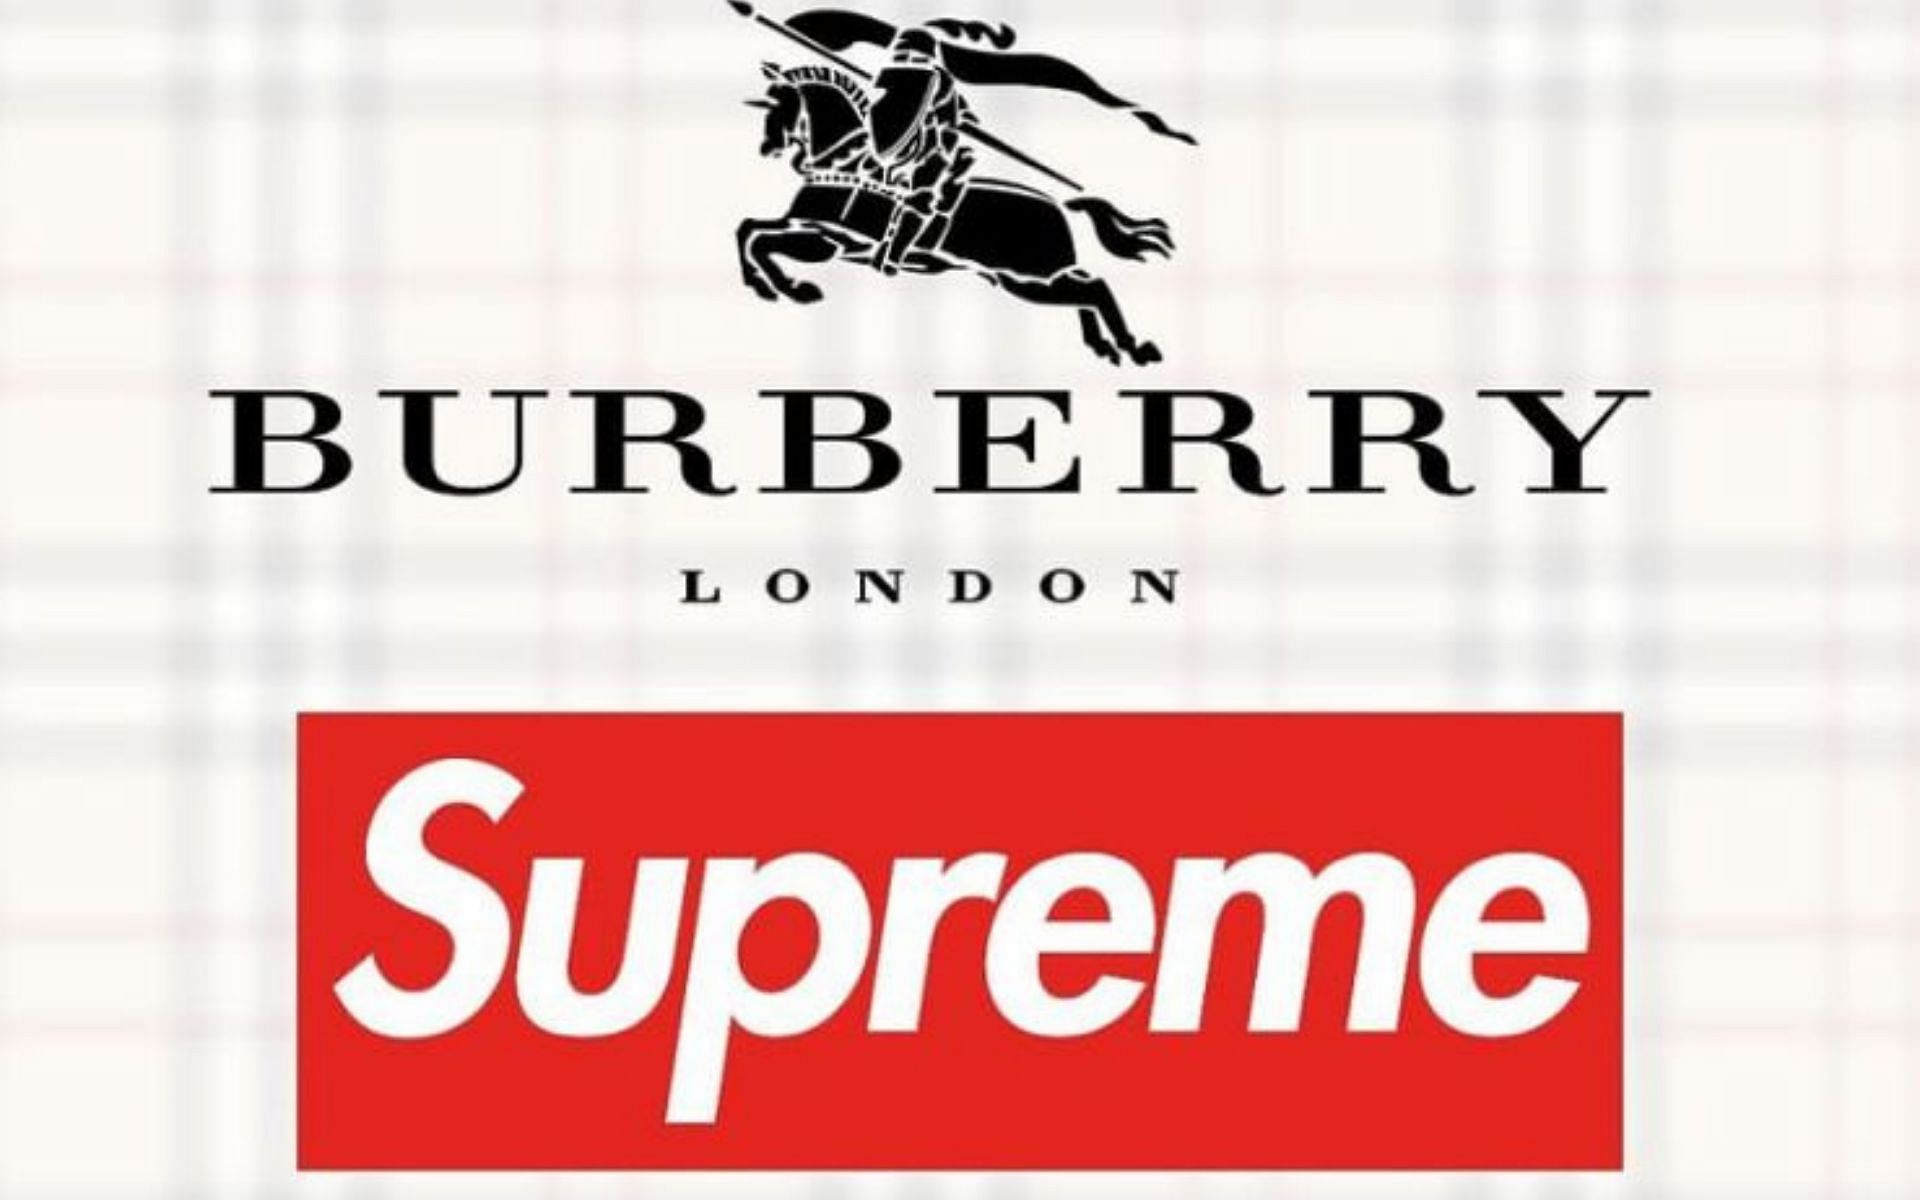 Burberry x Supreme rumors are gaining strenght (Image via Instagram/shoeprize)